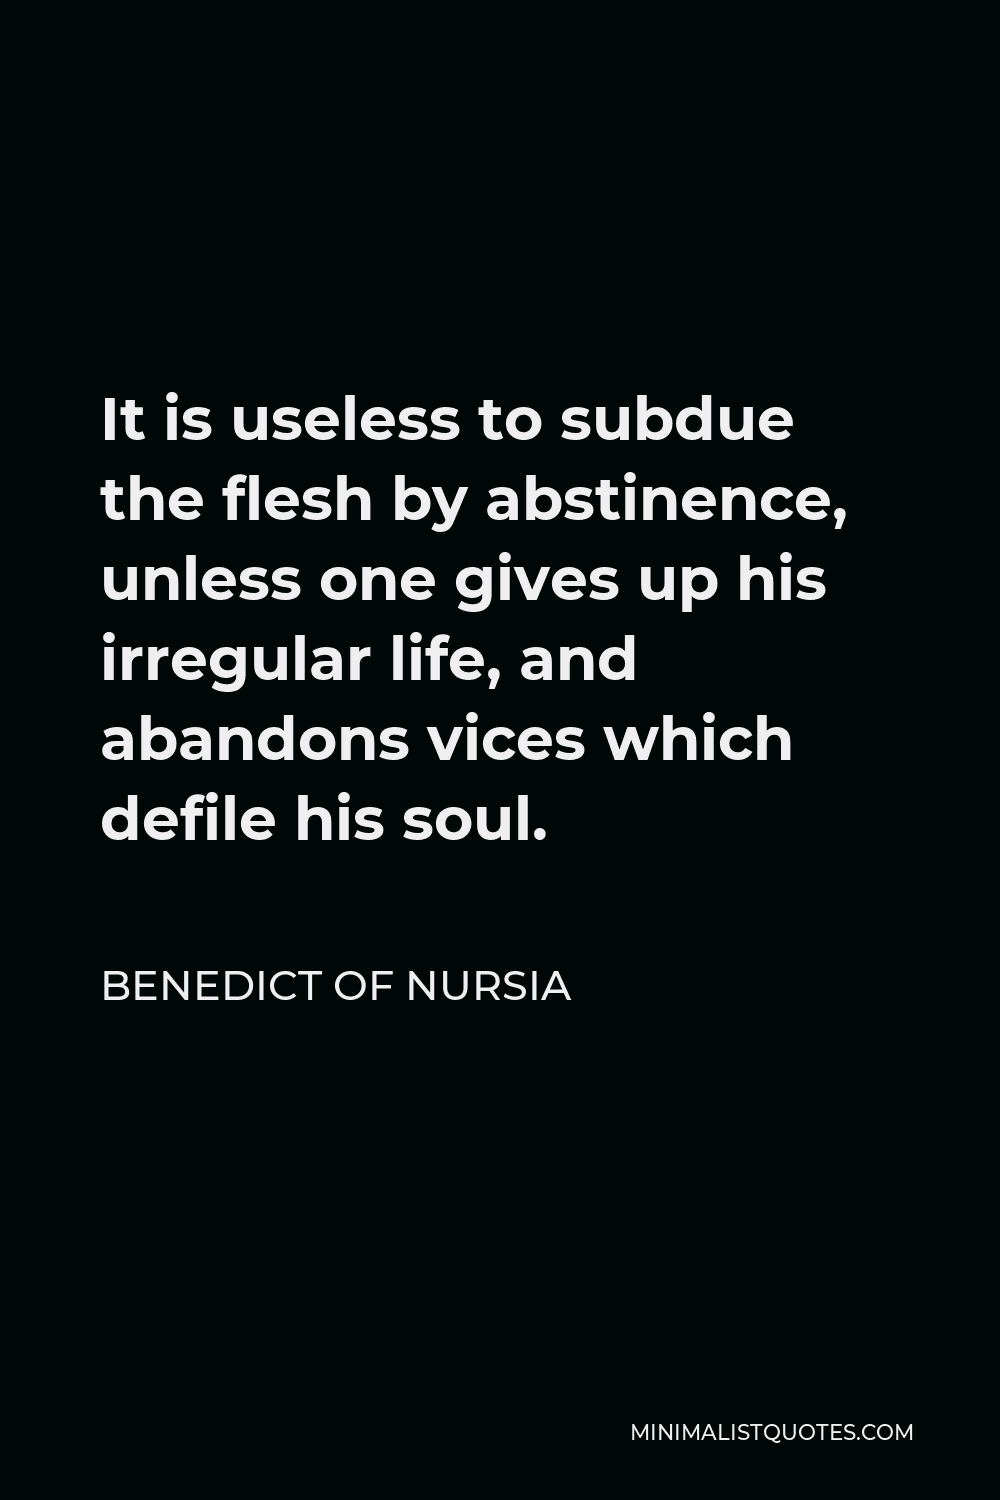 Benedict of Nursia Quote - It is useless to subdue the flesh by abstinence, unless one gives up his irregular life, and abandons vices which defile his soul.